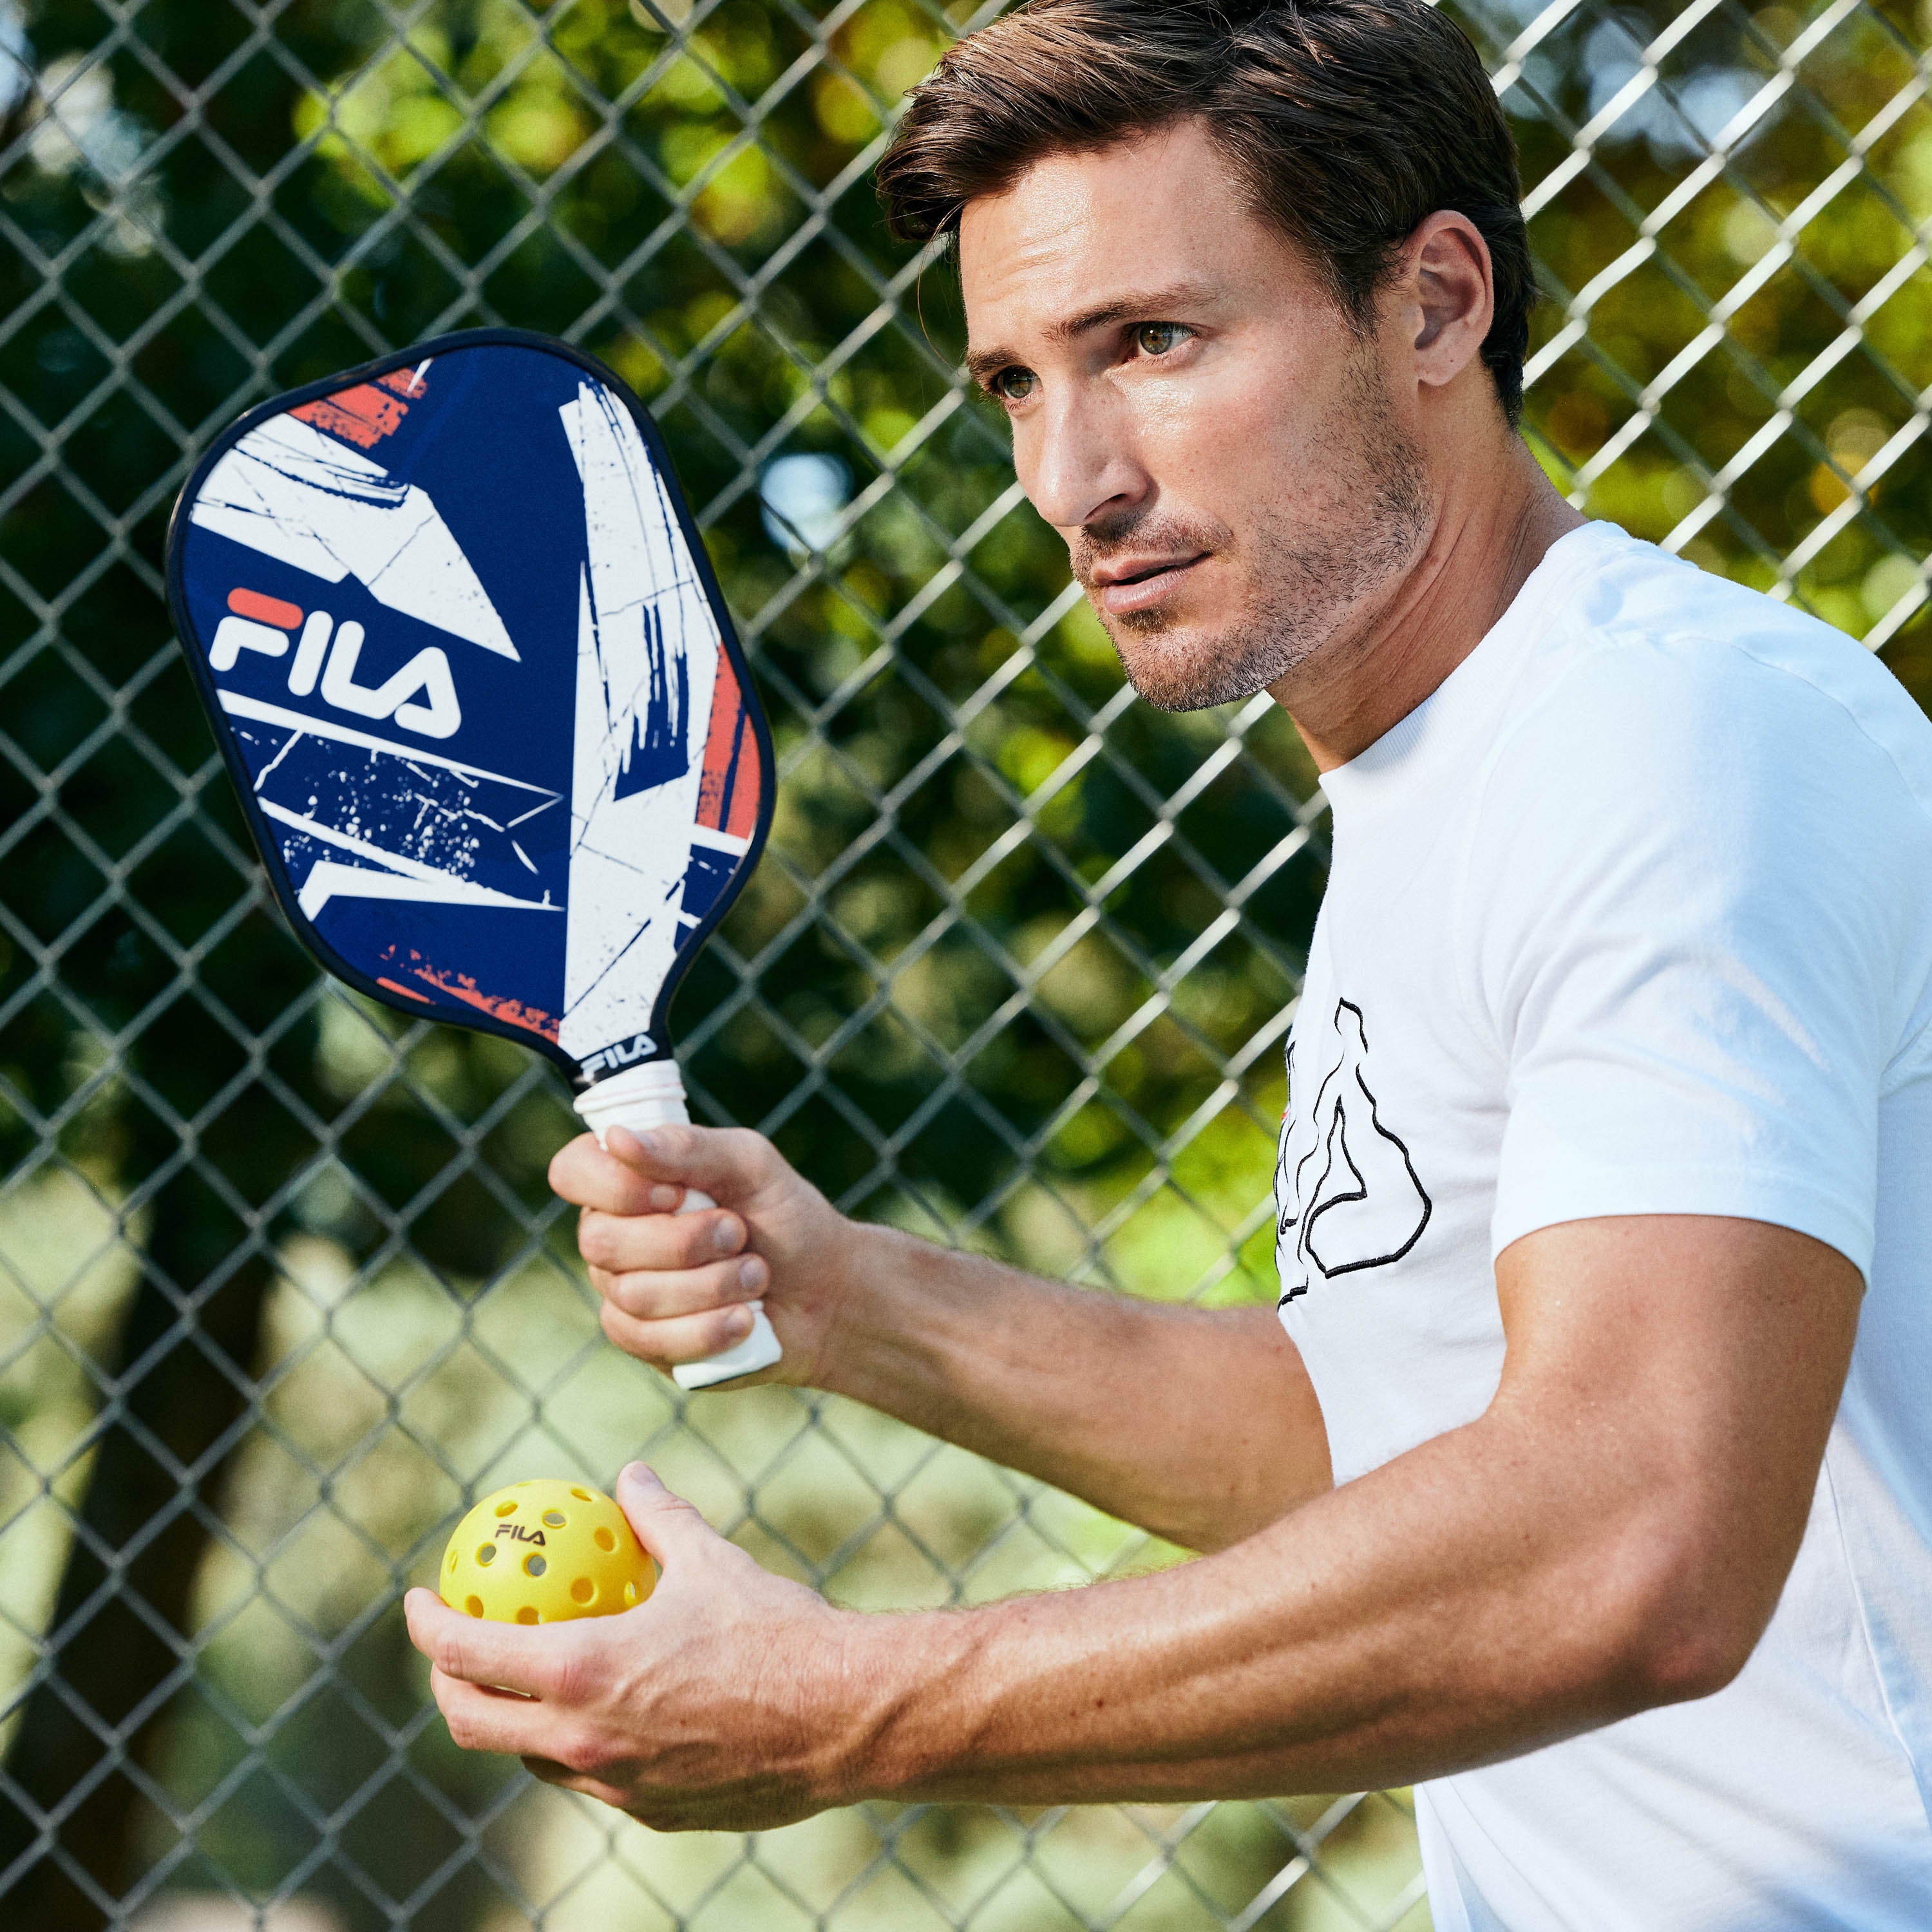 Person holding the FILA Fiberglass Paddle -Action getting ready to hit the ball